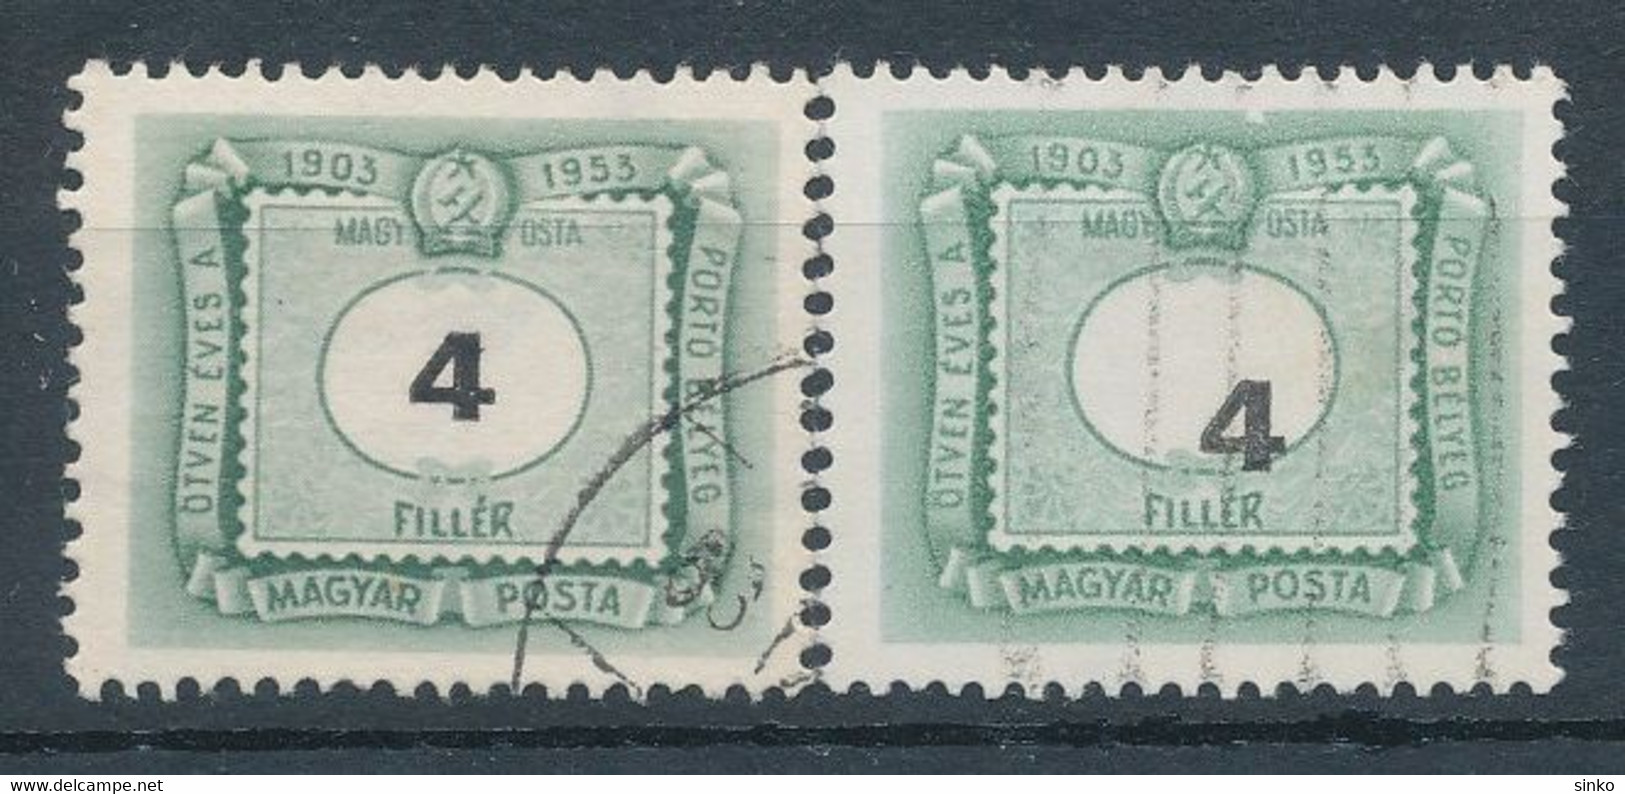 1953. The Hungarian Porto Stamp Is 50 Years Old - Misprint - Errors, Freaks & Oddities (EFO)